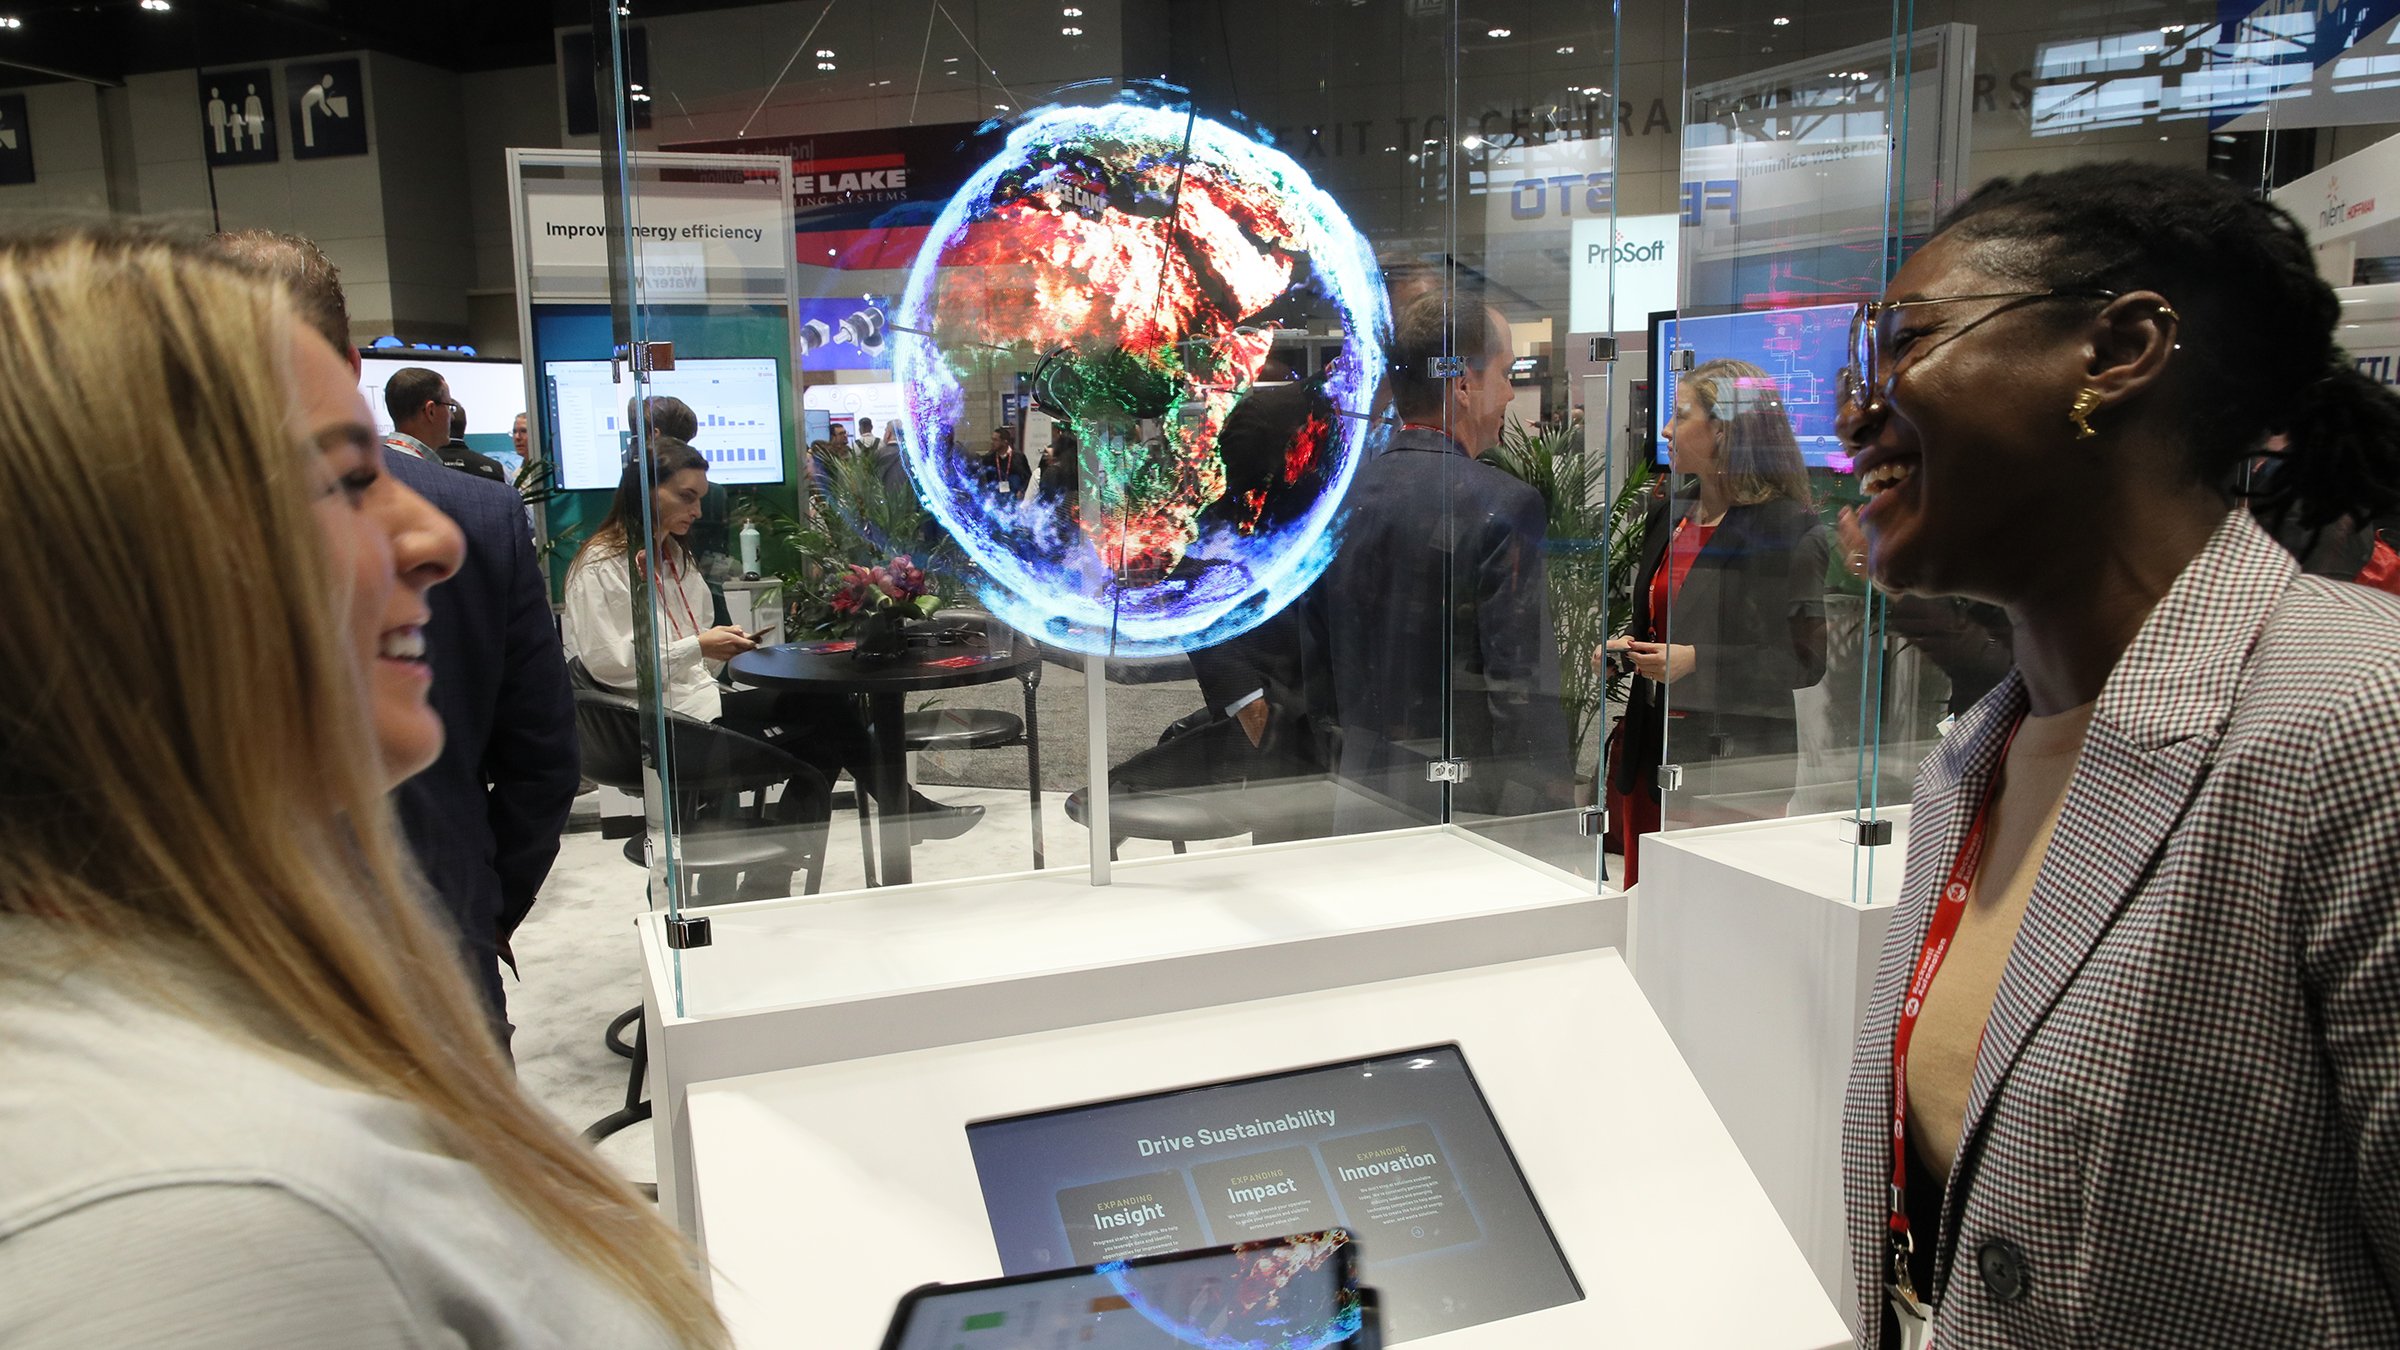 Two women laughing and interacting looking at display of a globe using a tablet